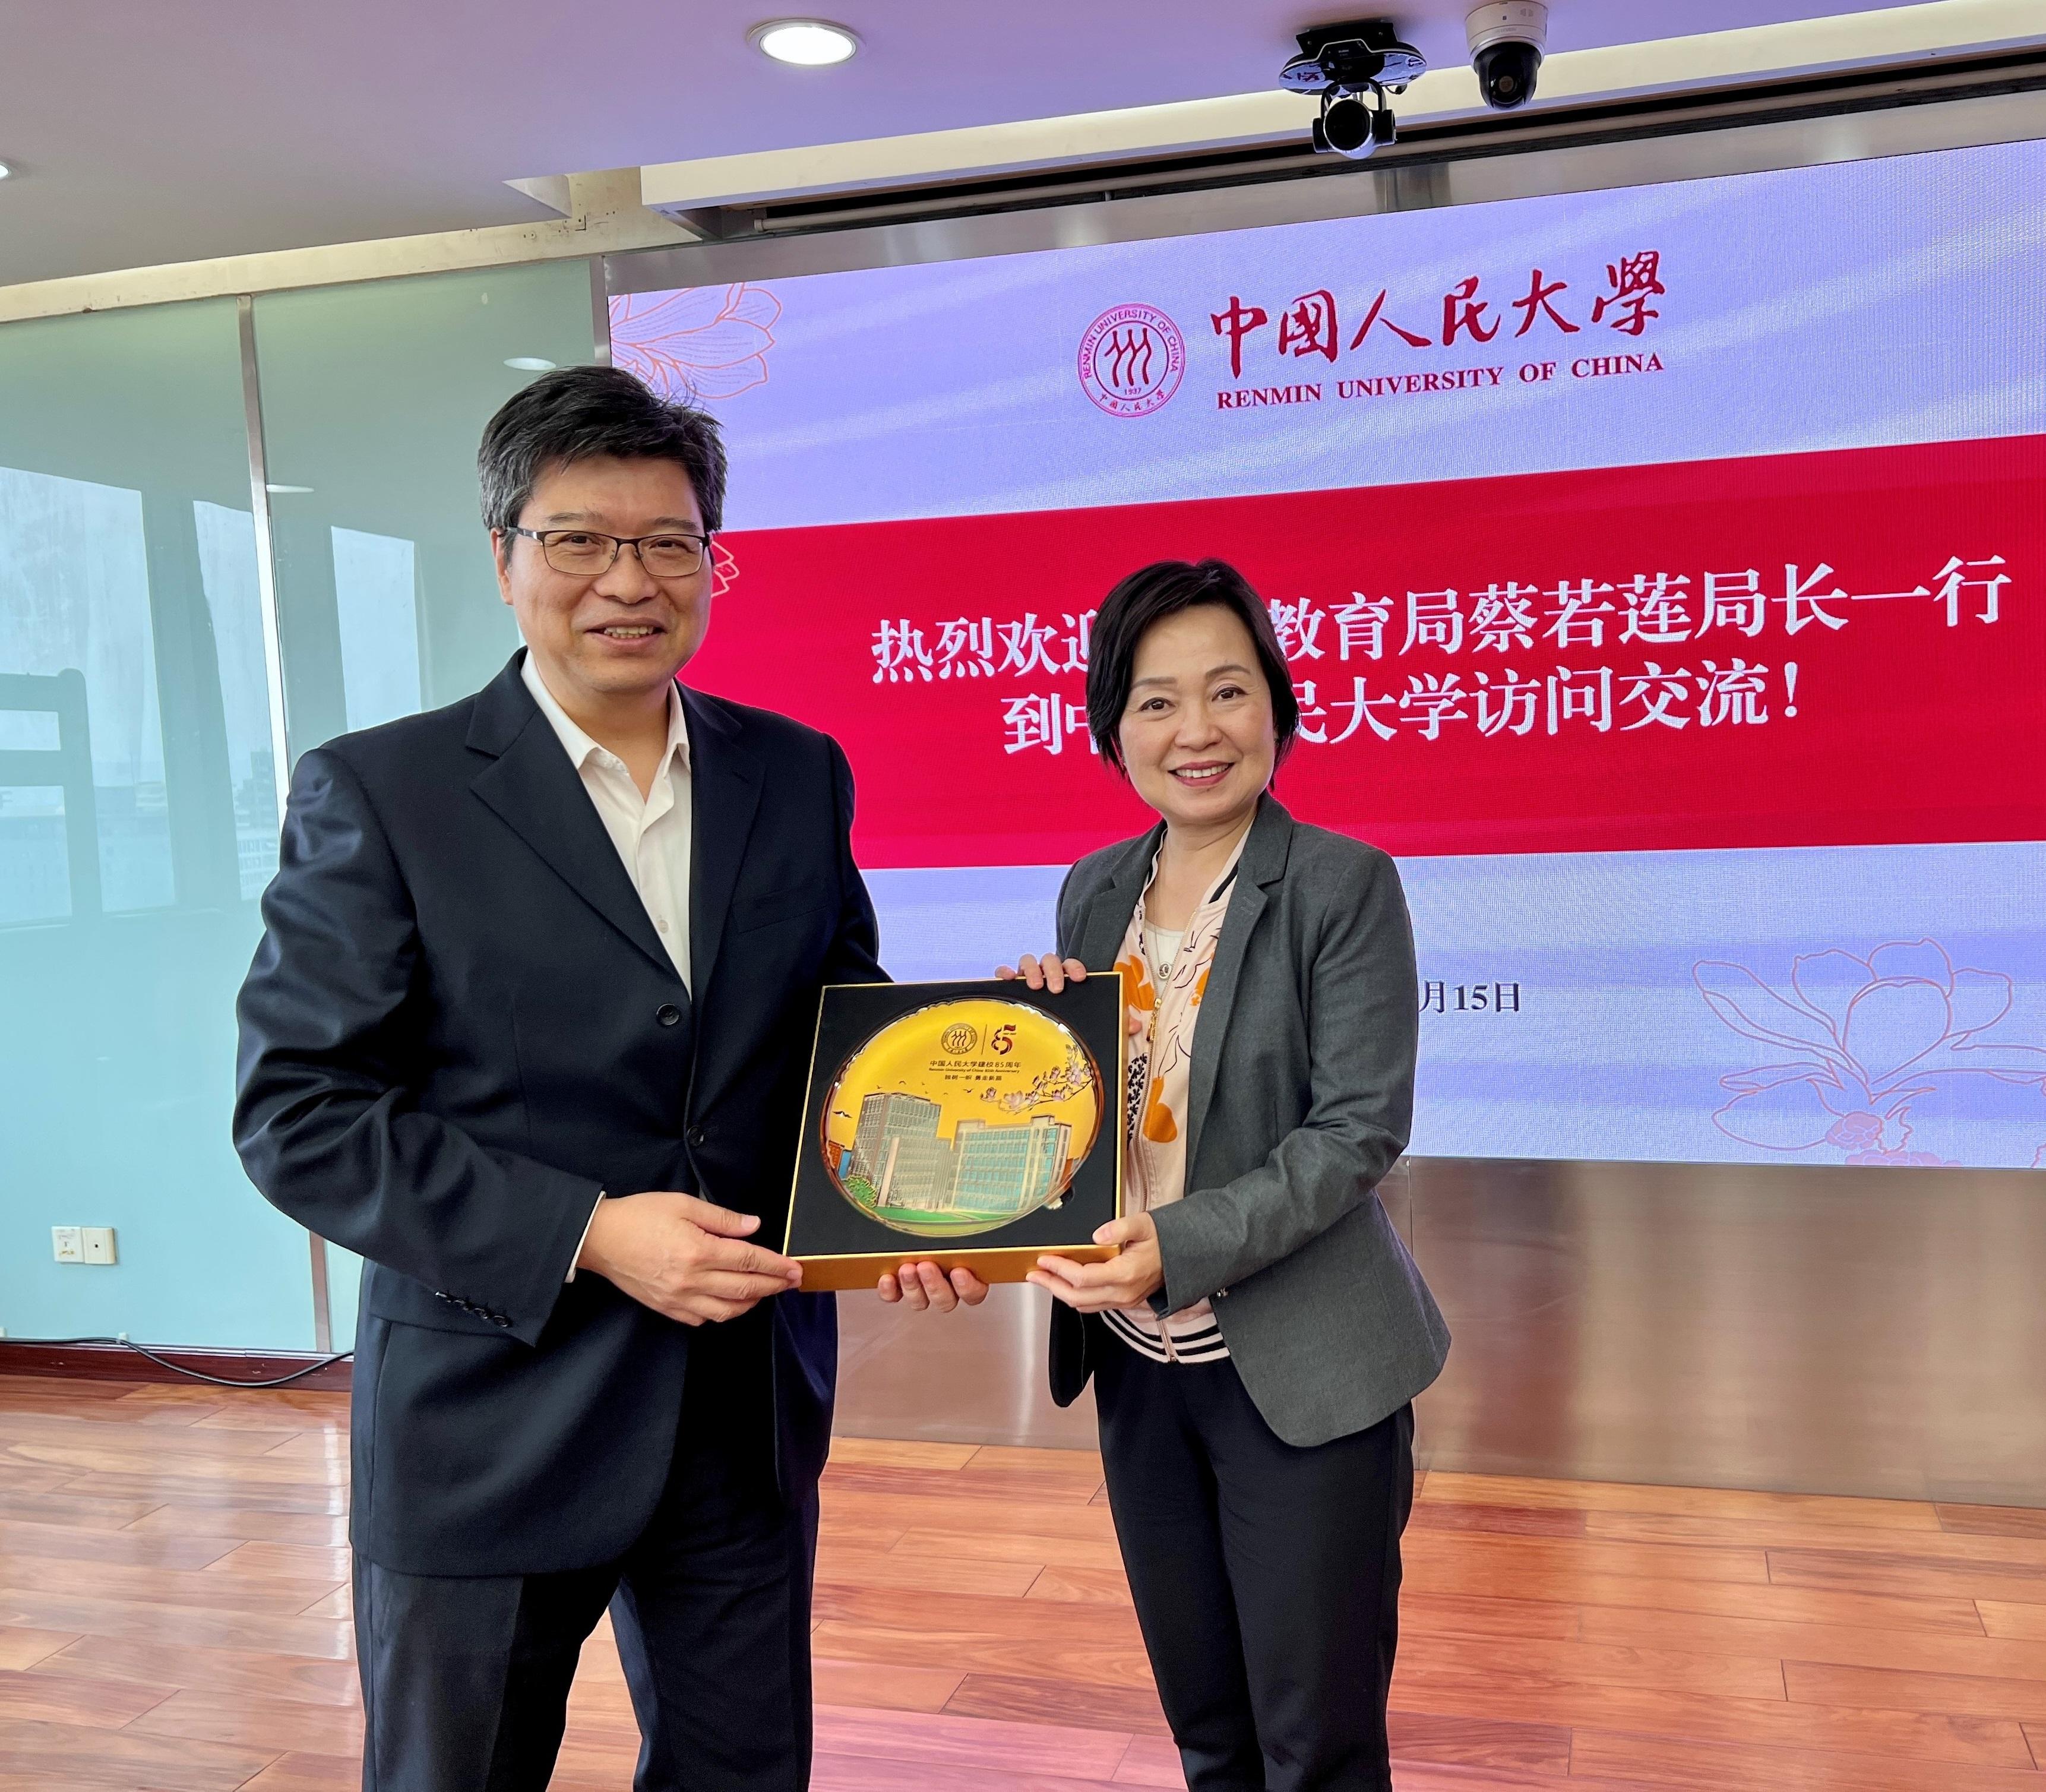 The Secretary for Education, Dr Choi Yuk-lin (right), visits Renmin University of China and meets its President, Professor Lin Shangli (left), in Beijing yesterday (May 15).